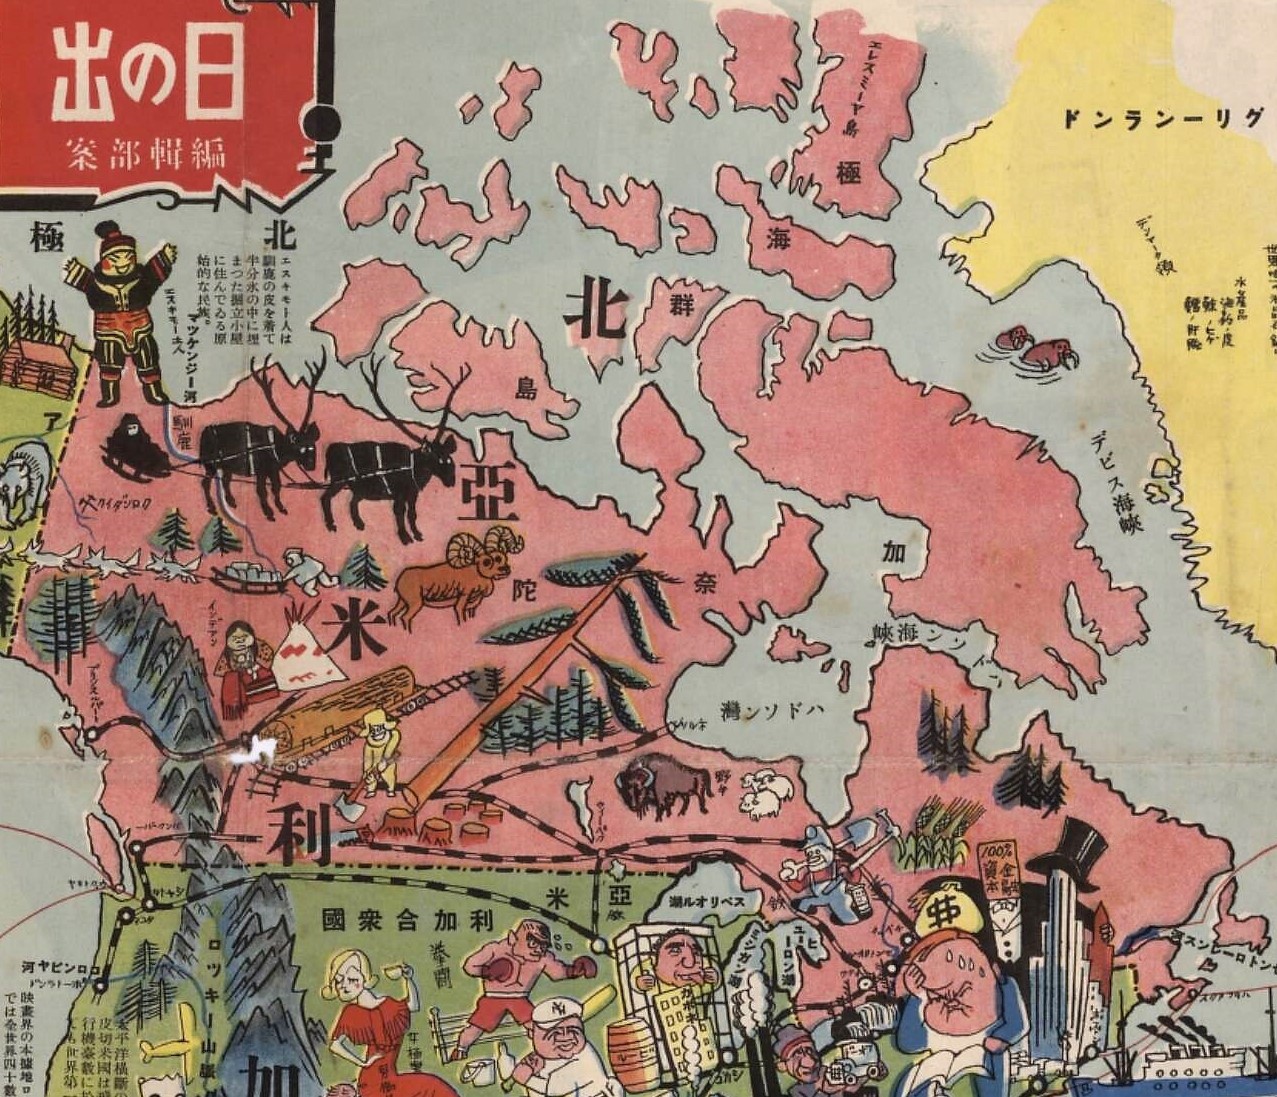 Anime-style map image of Canada and the northern part of the United States. Caribou, bison, miners, and lumberjack characters are depicted in Canada.